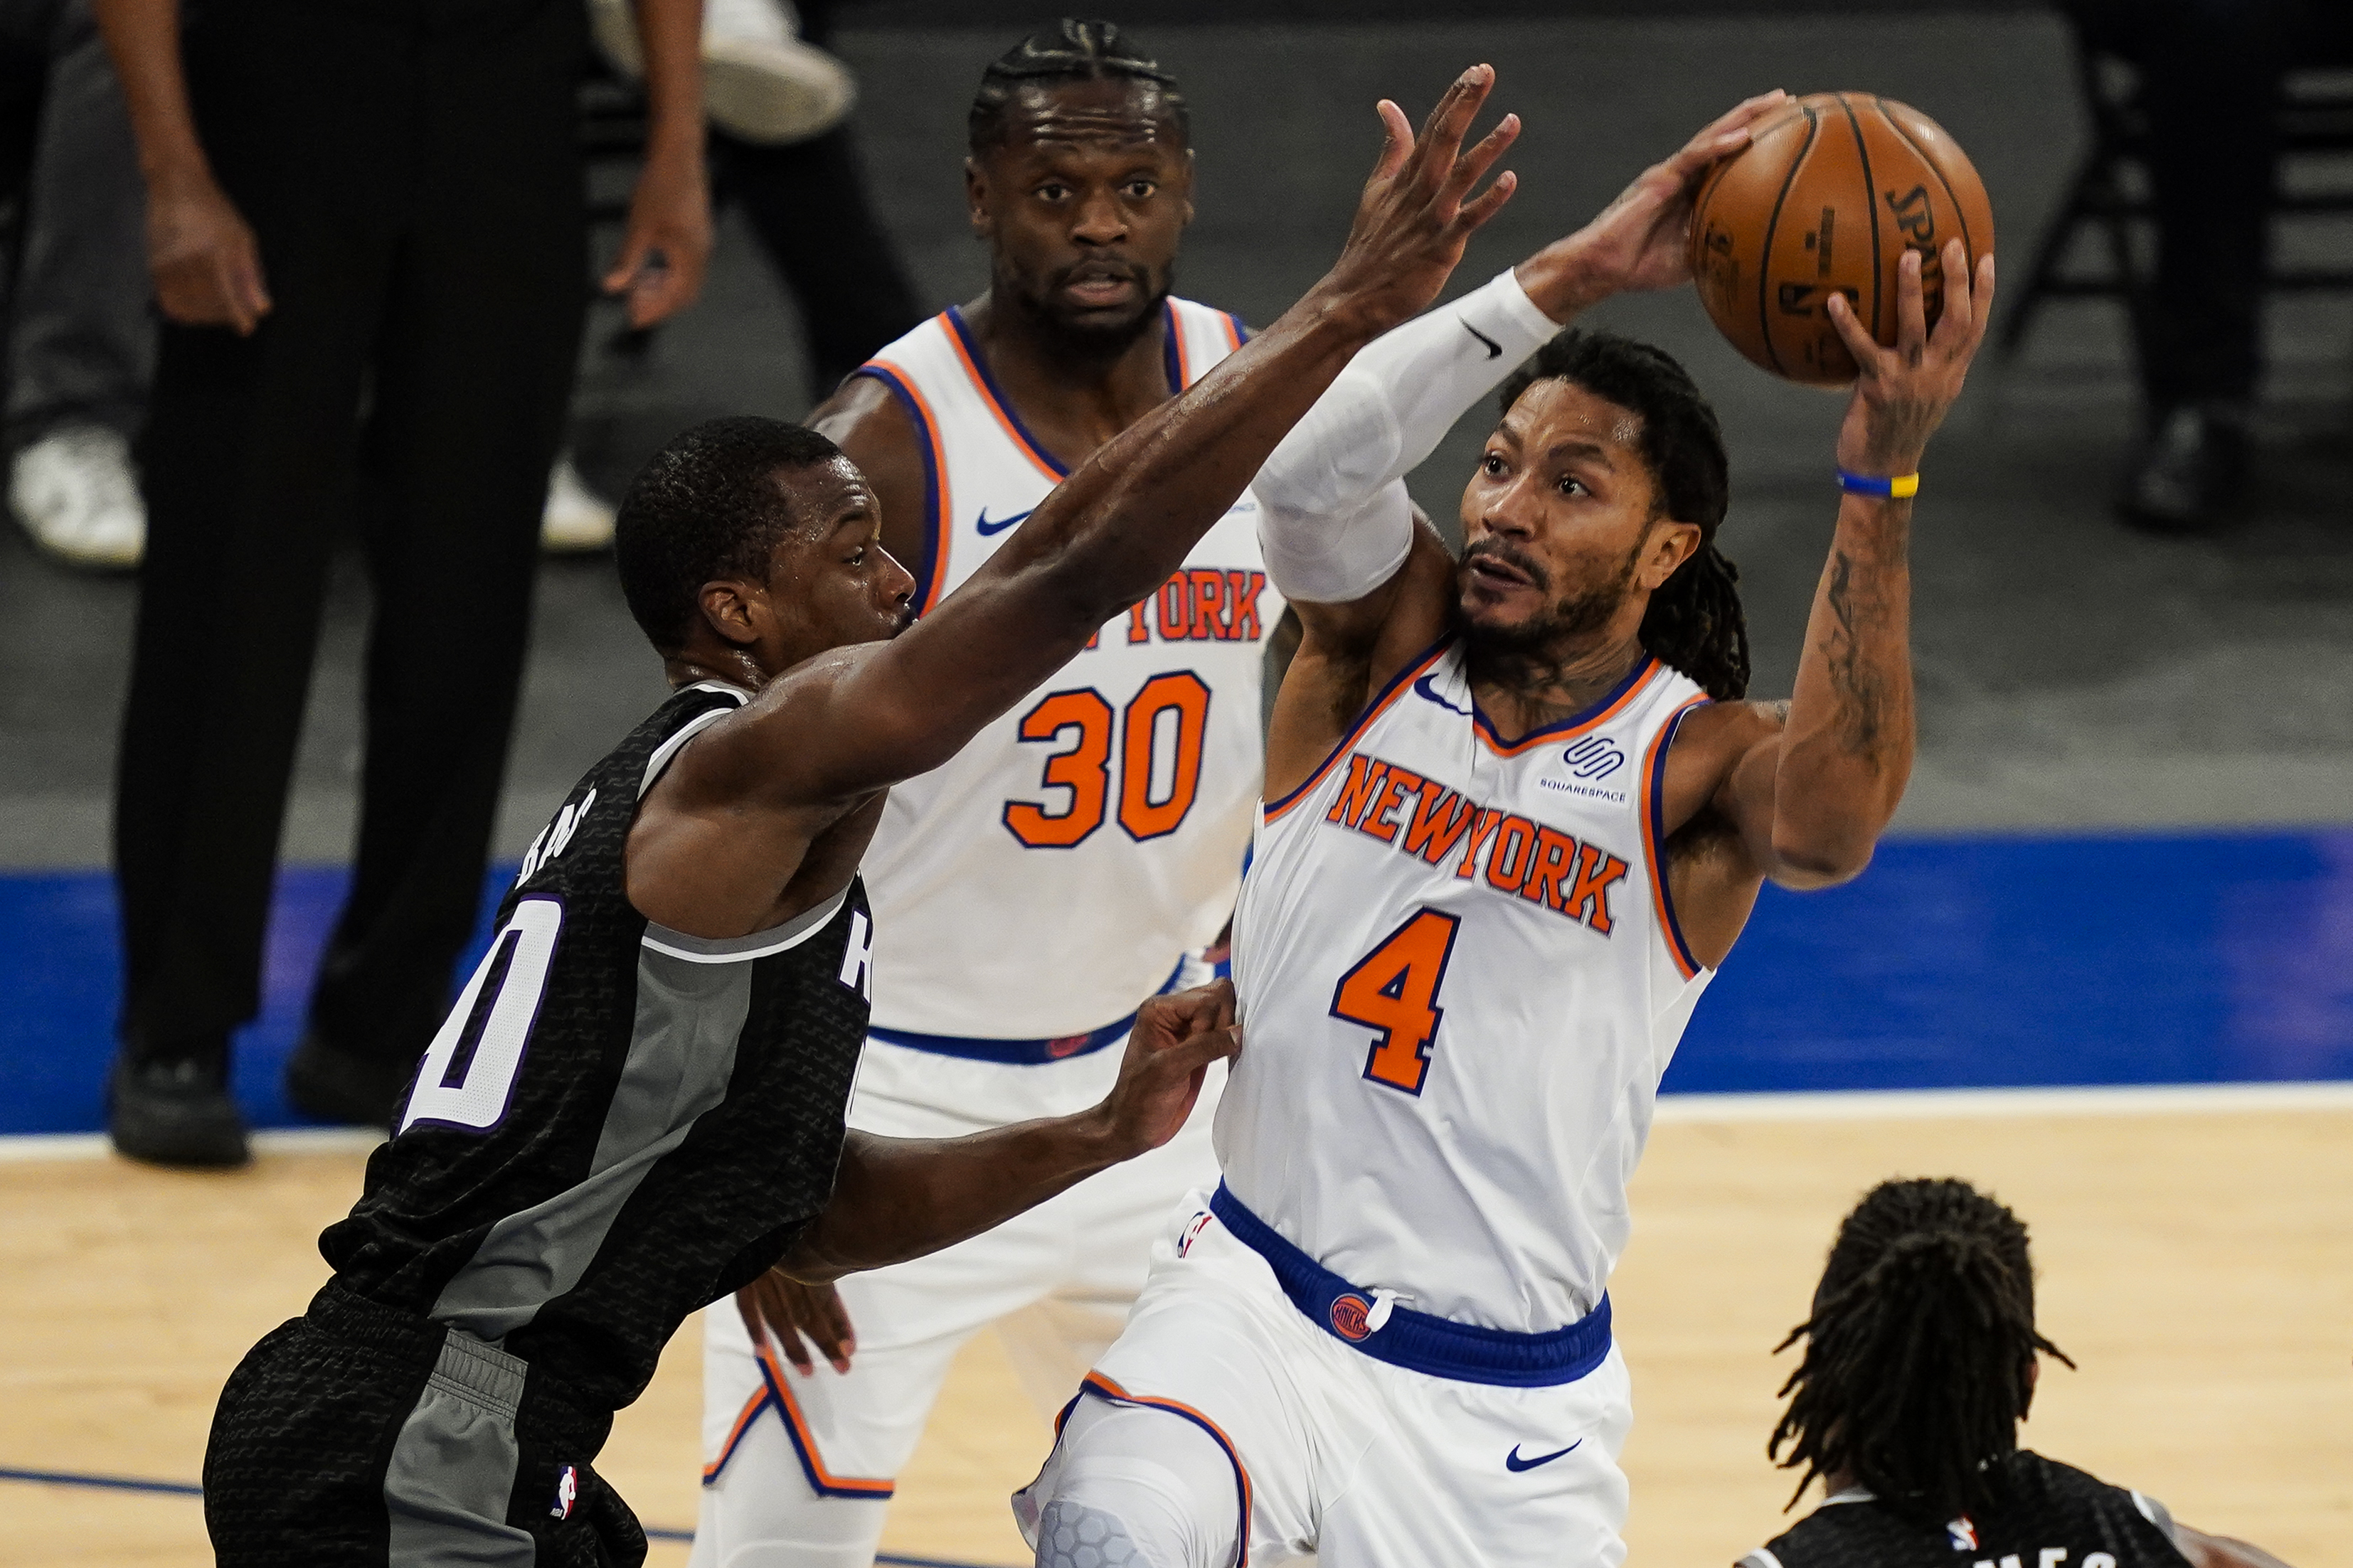 The New York Knicks may have already made their valuable switch